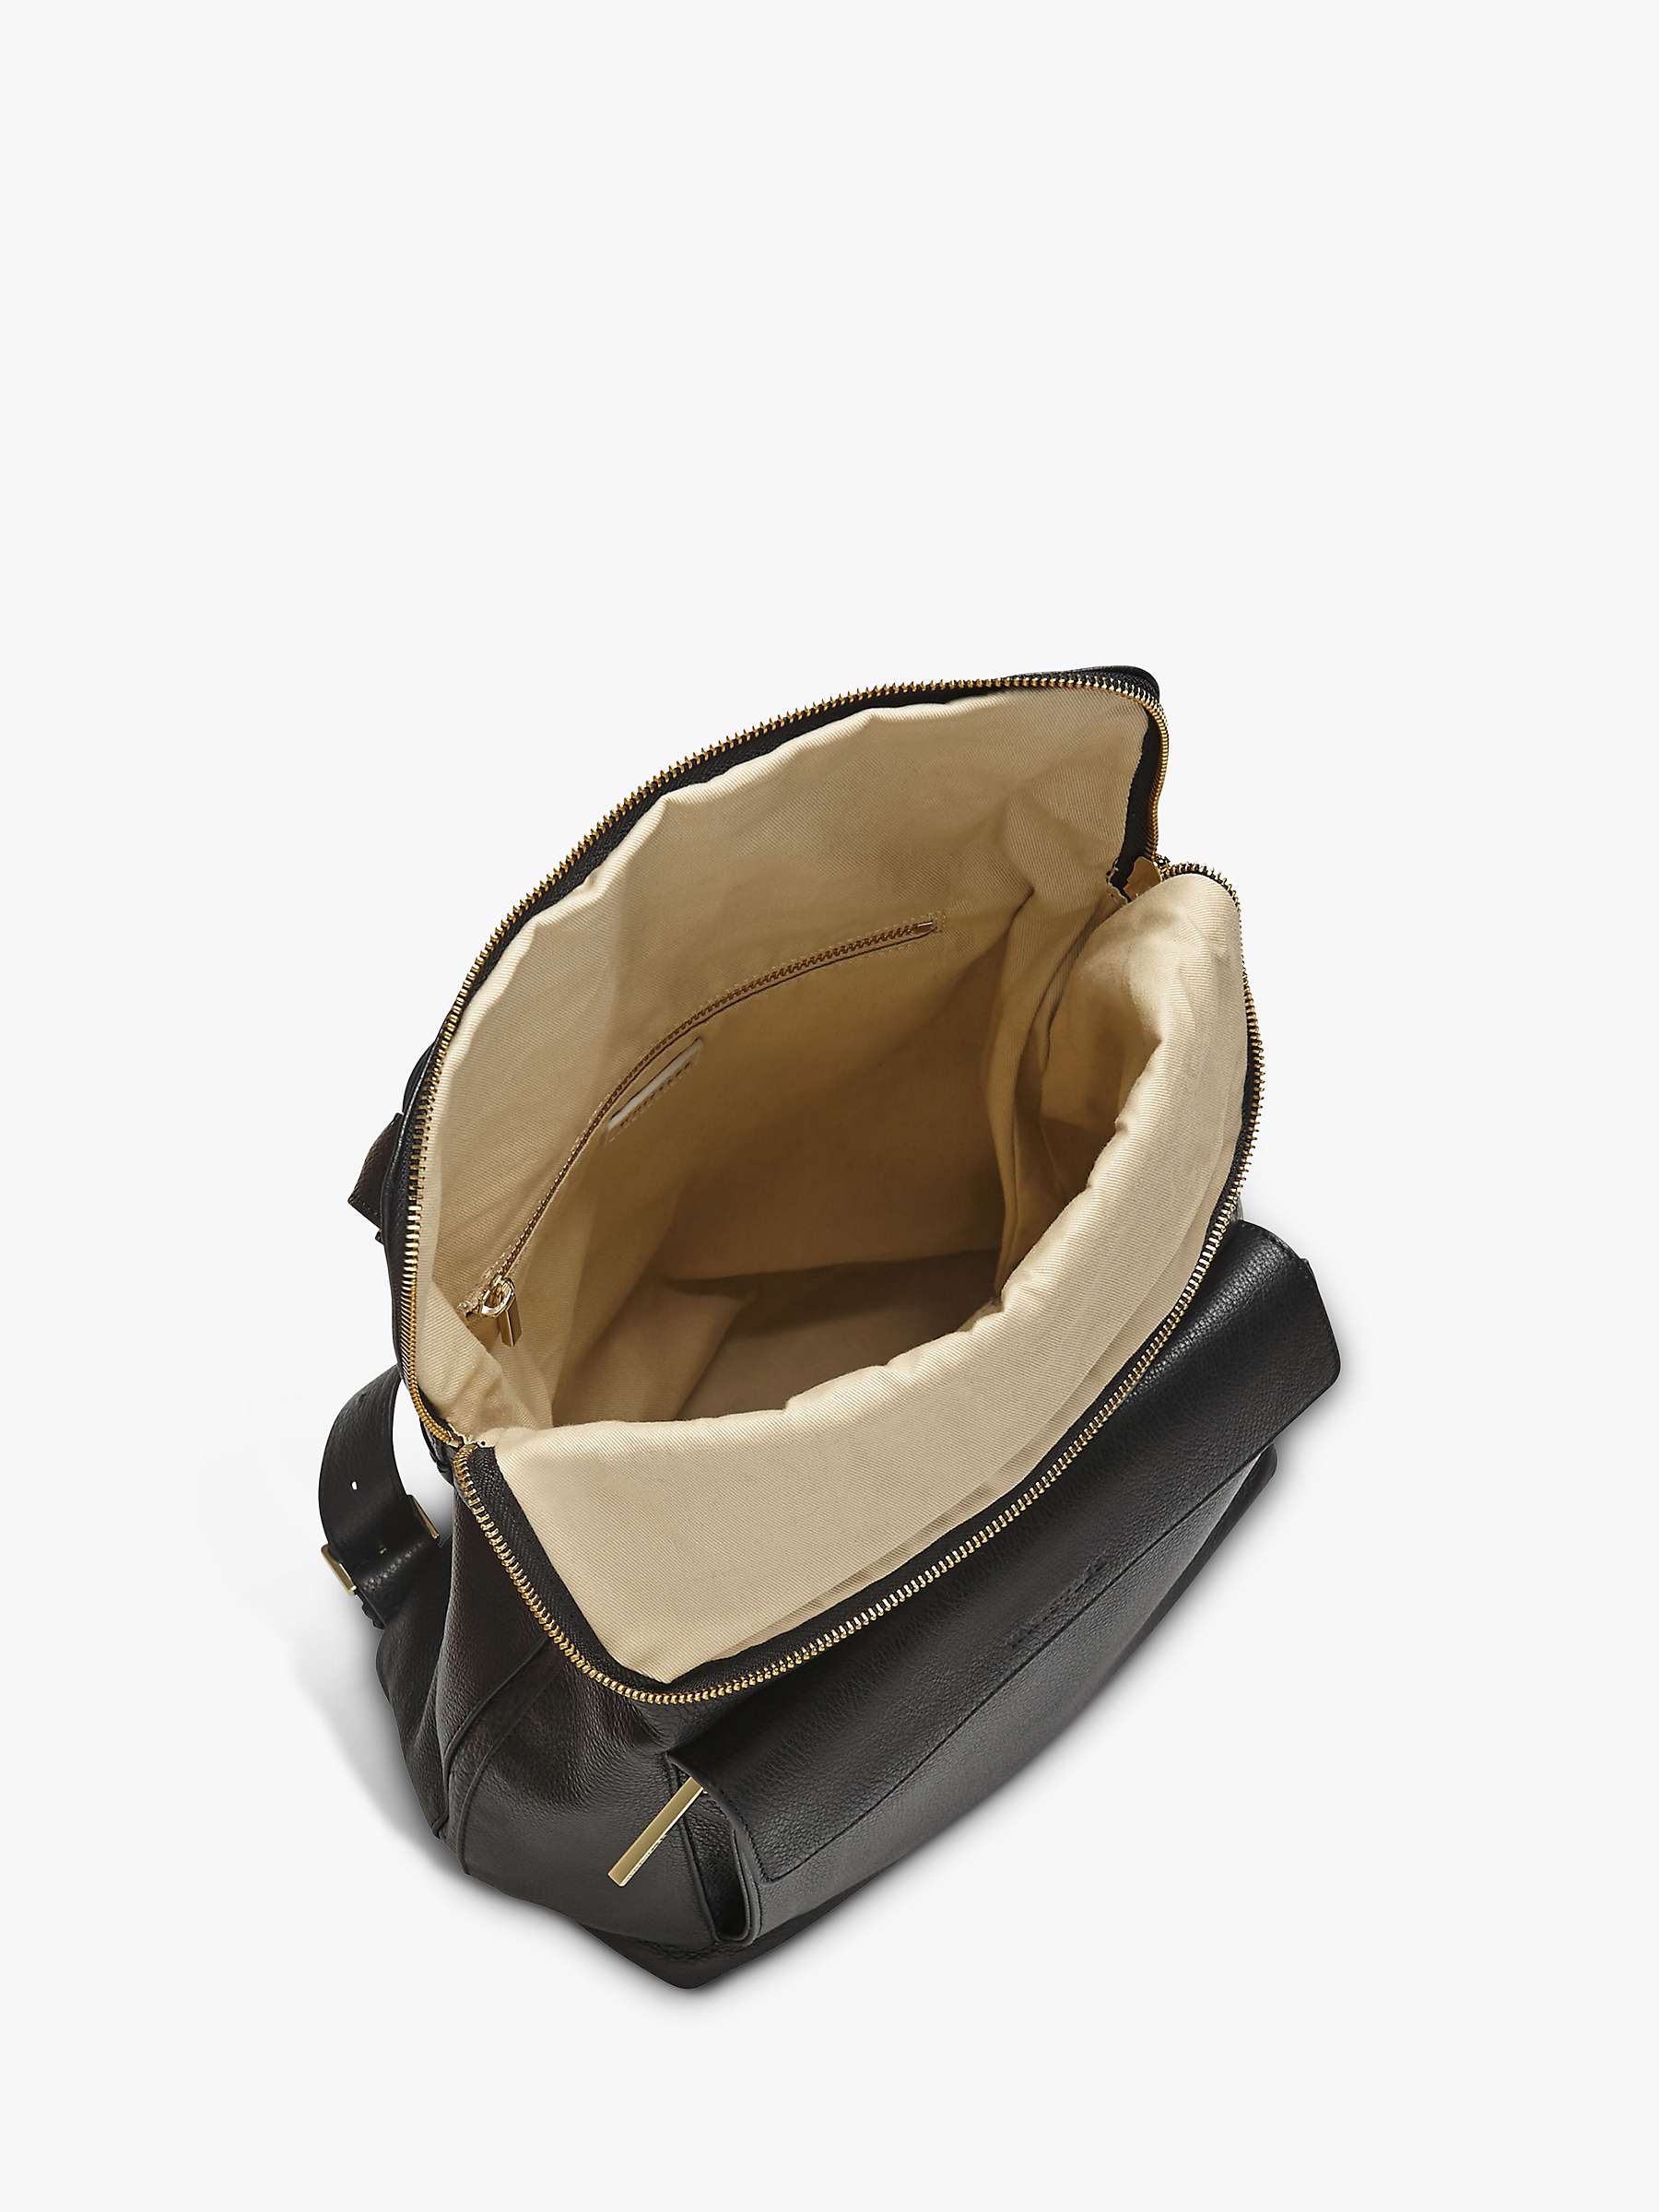 Buy Whistles Verity Large Leather Backpack Online at johnlewis.com